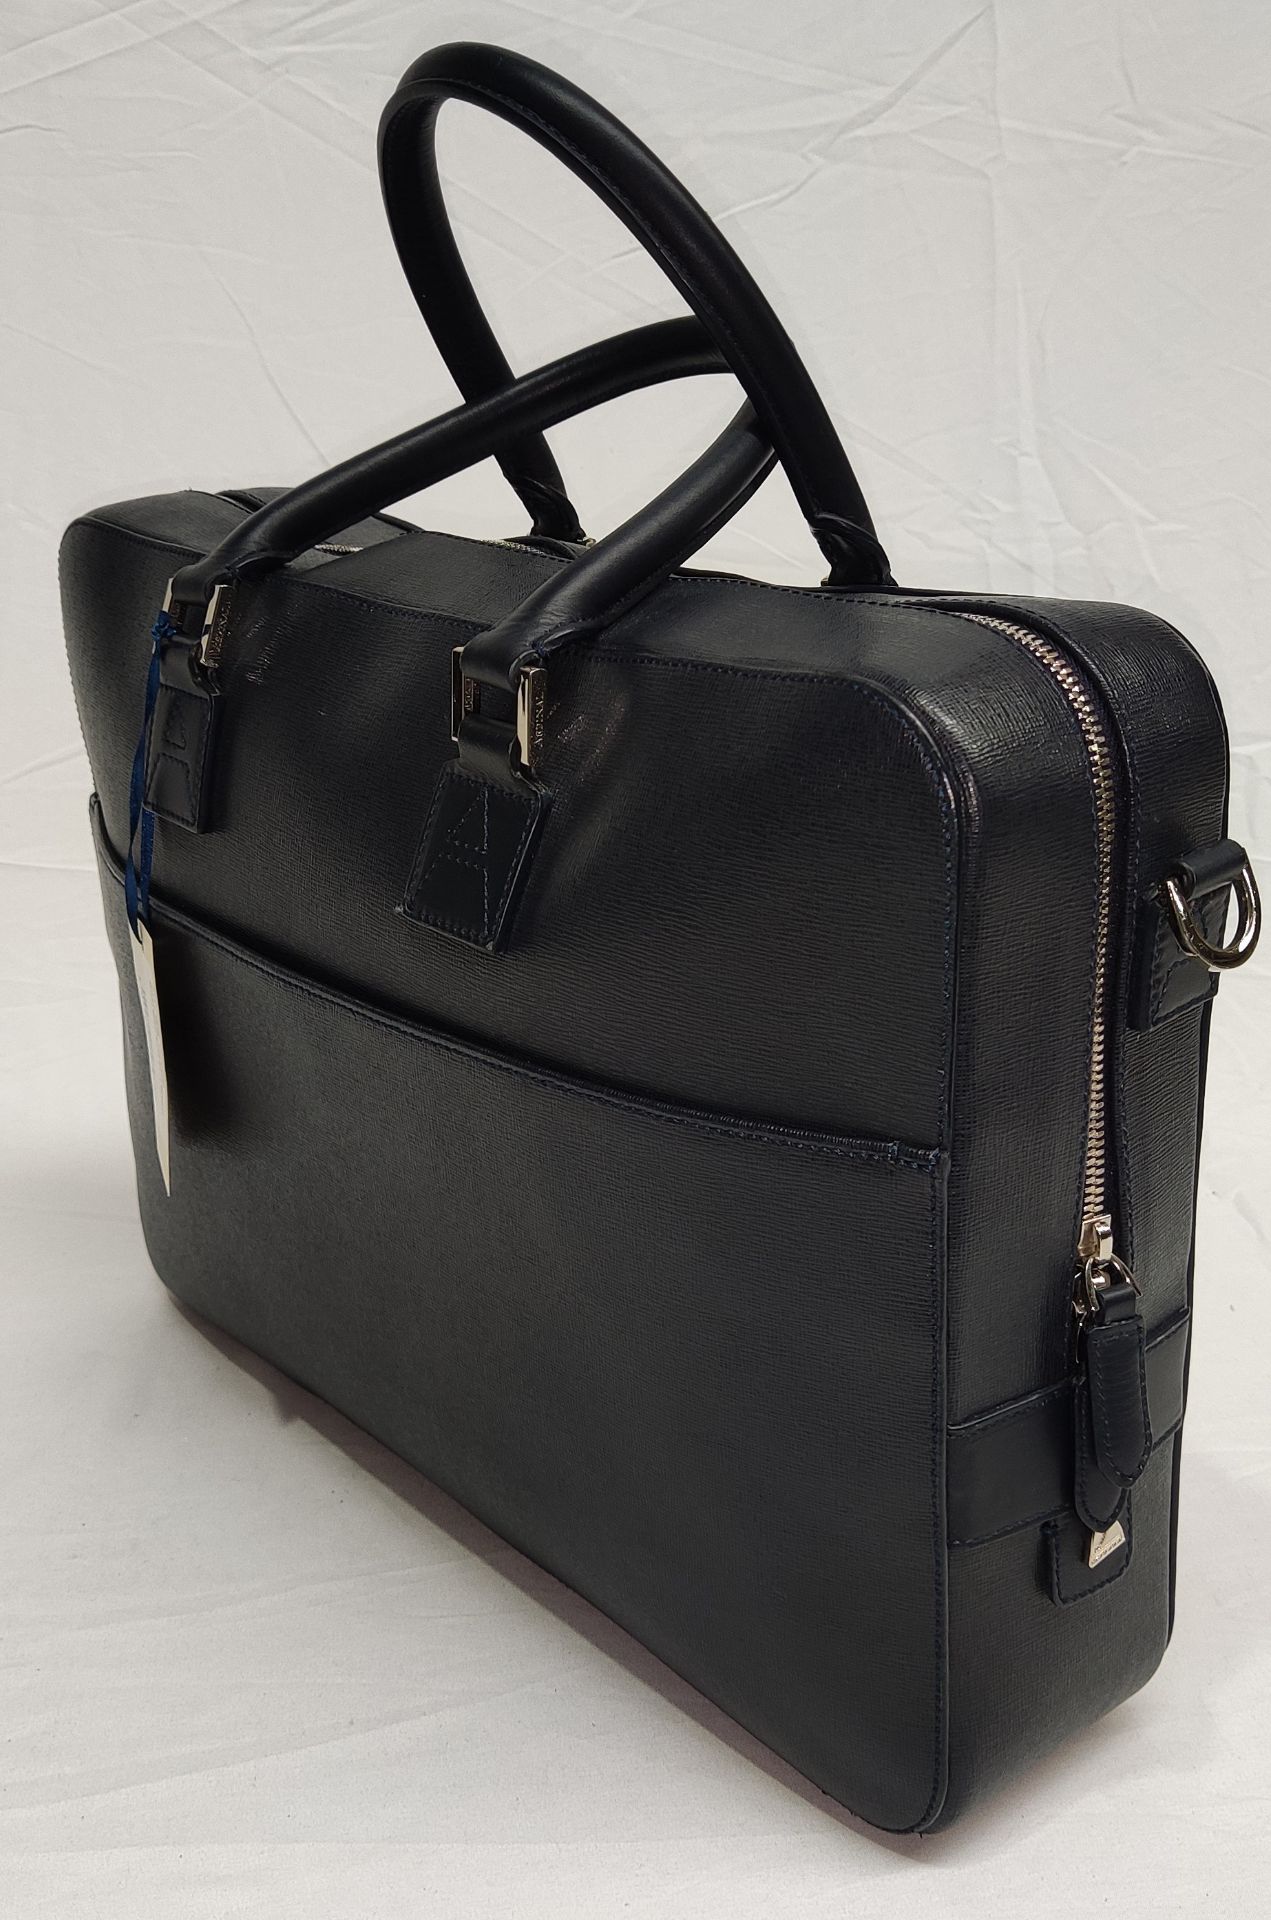 1 x ASPINAL OF LONDON Mount Street Small Laptop Bag In Black Saffiano - Original RRP £650 - Ref: - Image 4 of 21